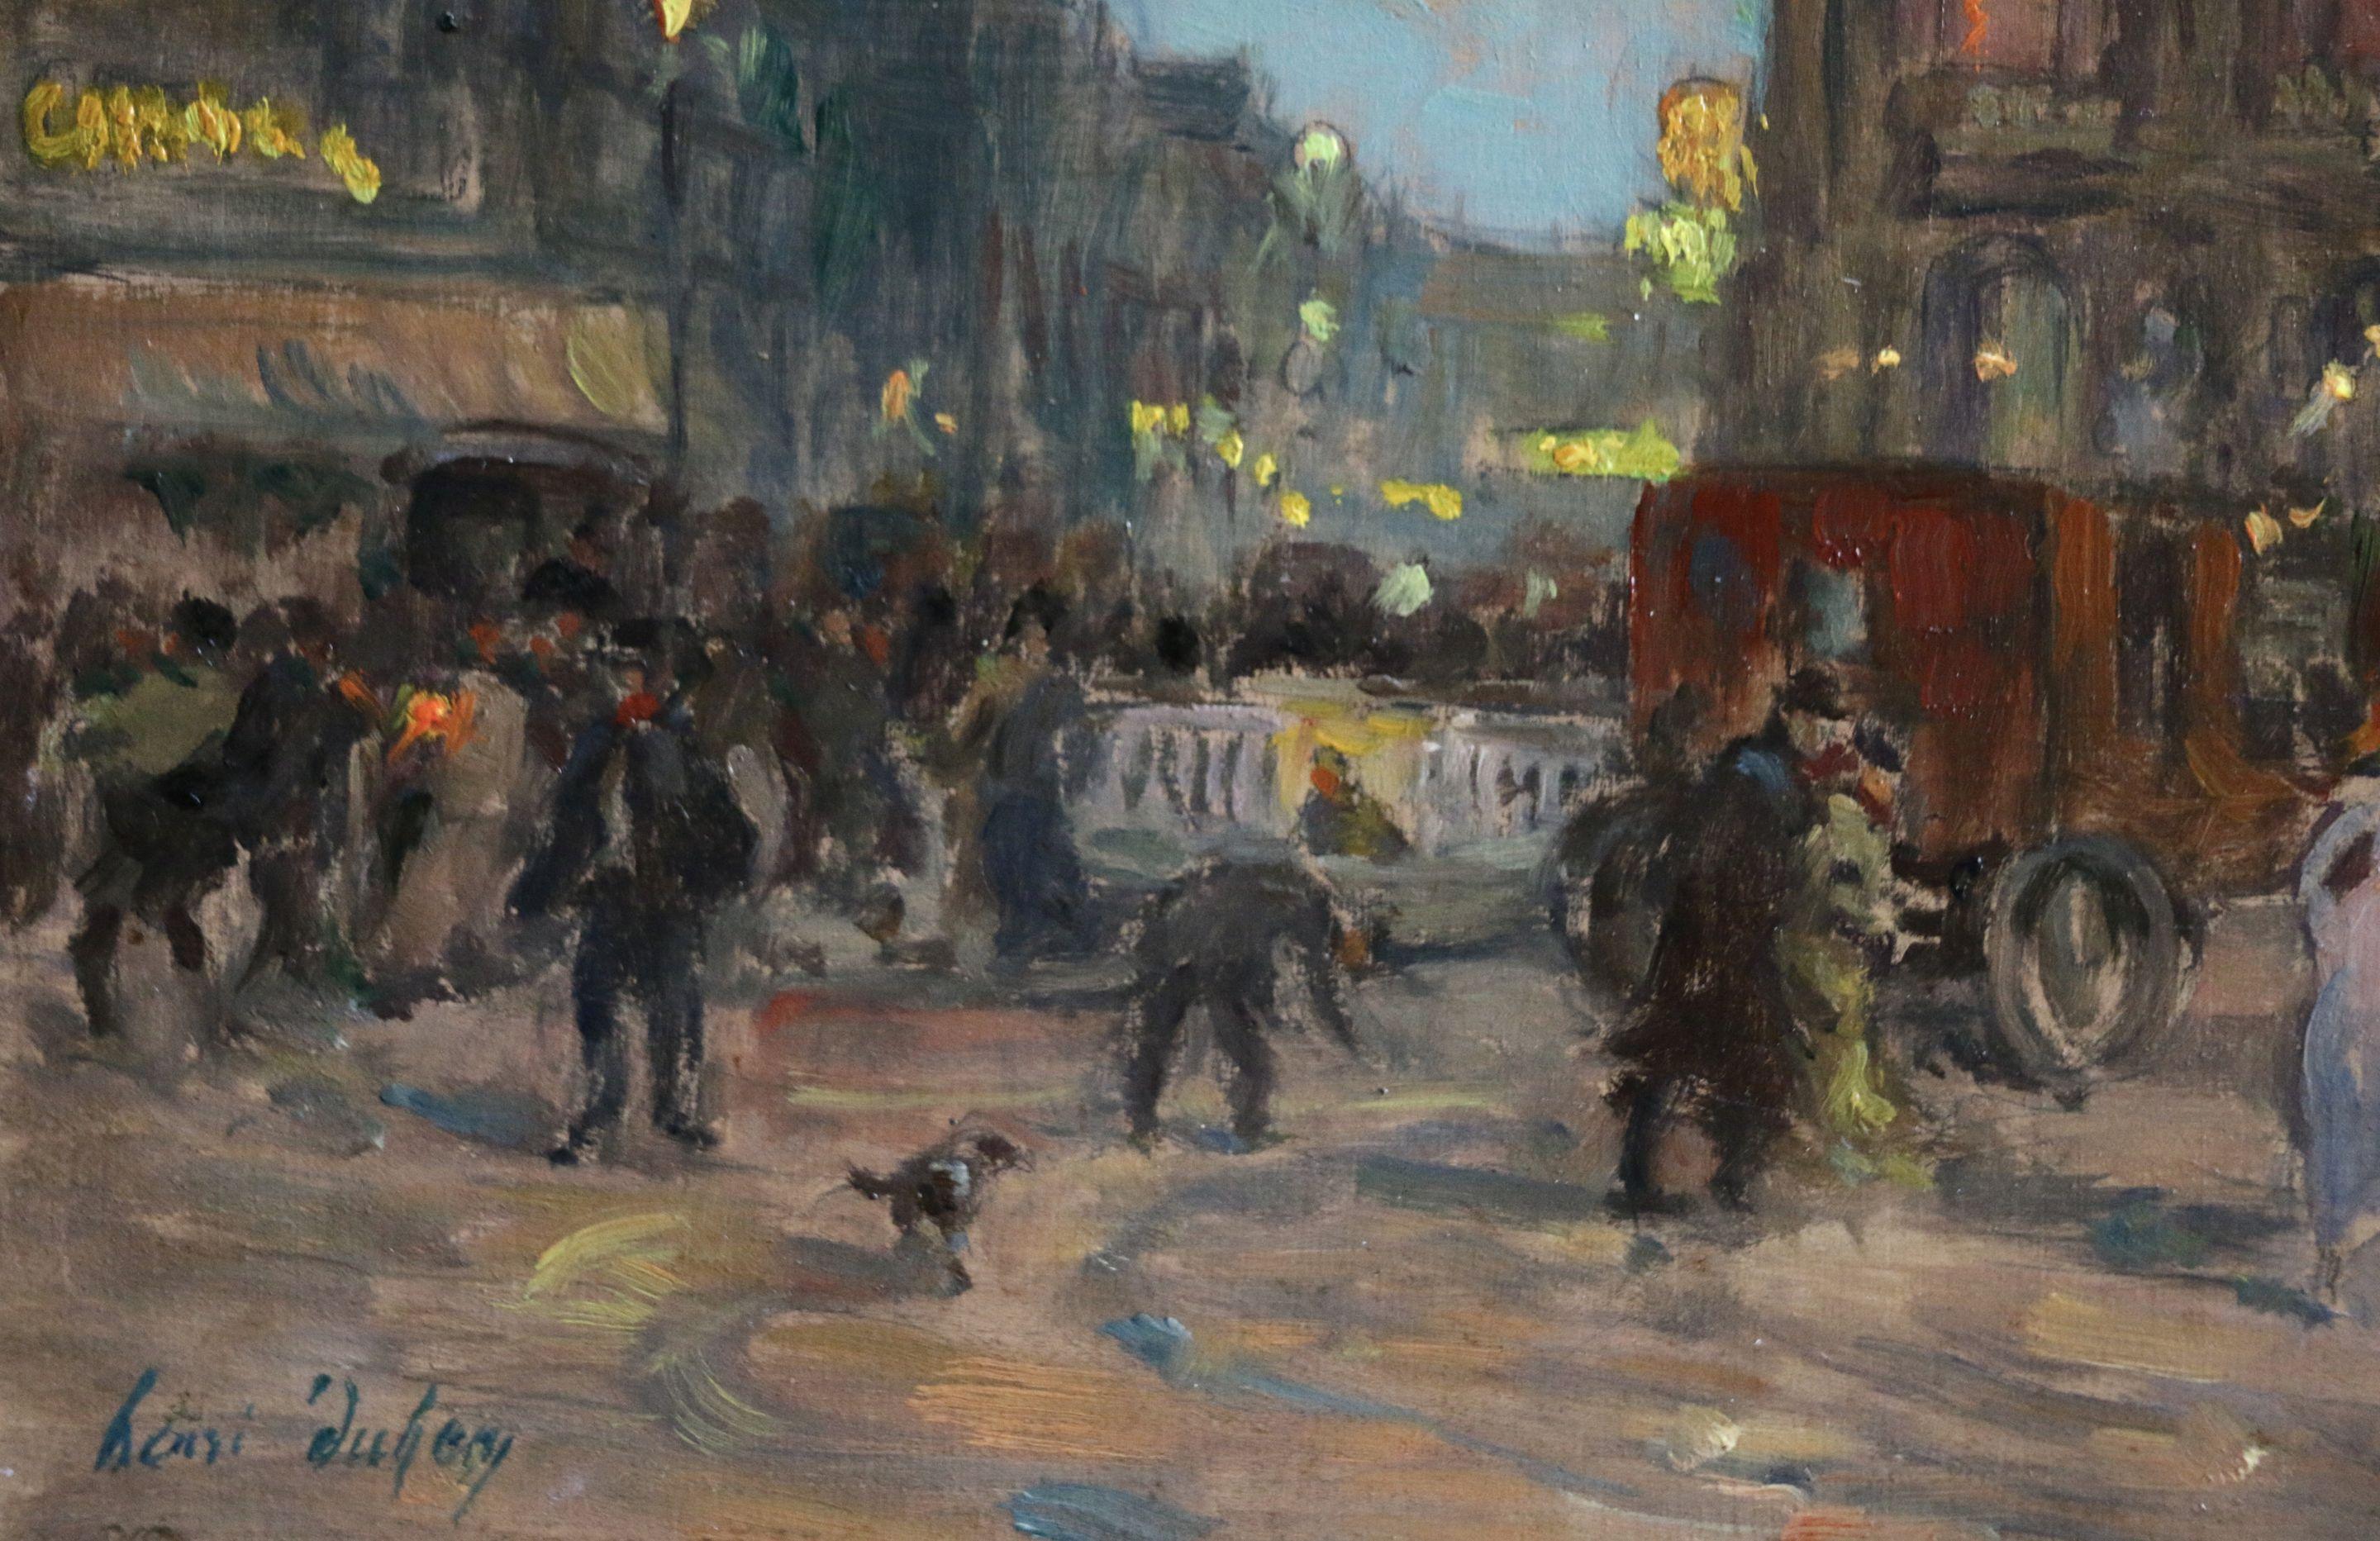 L'Opera - Paris - Impressionist Oil, Figures in Cityscape at Night by H Duhem  - Painting by Henri Duhem